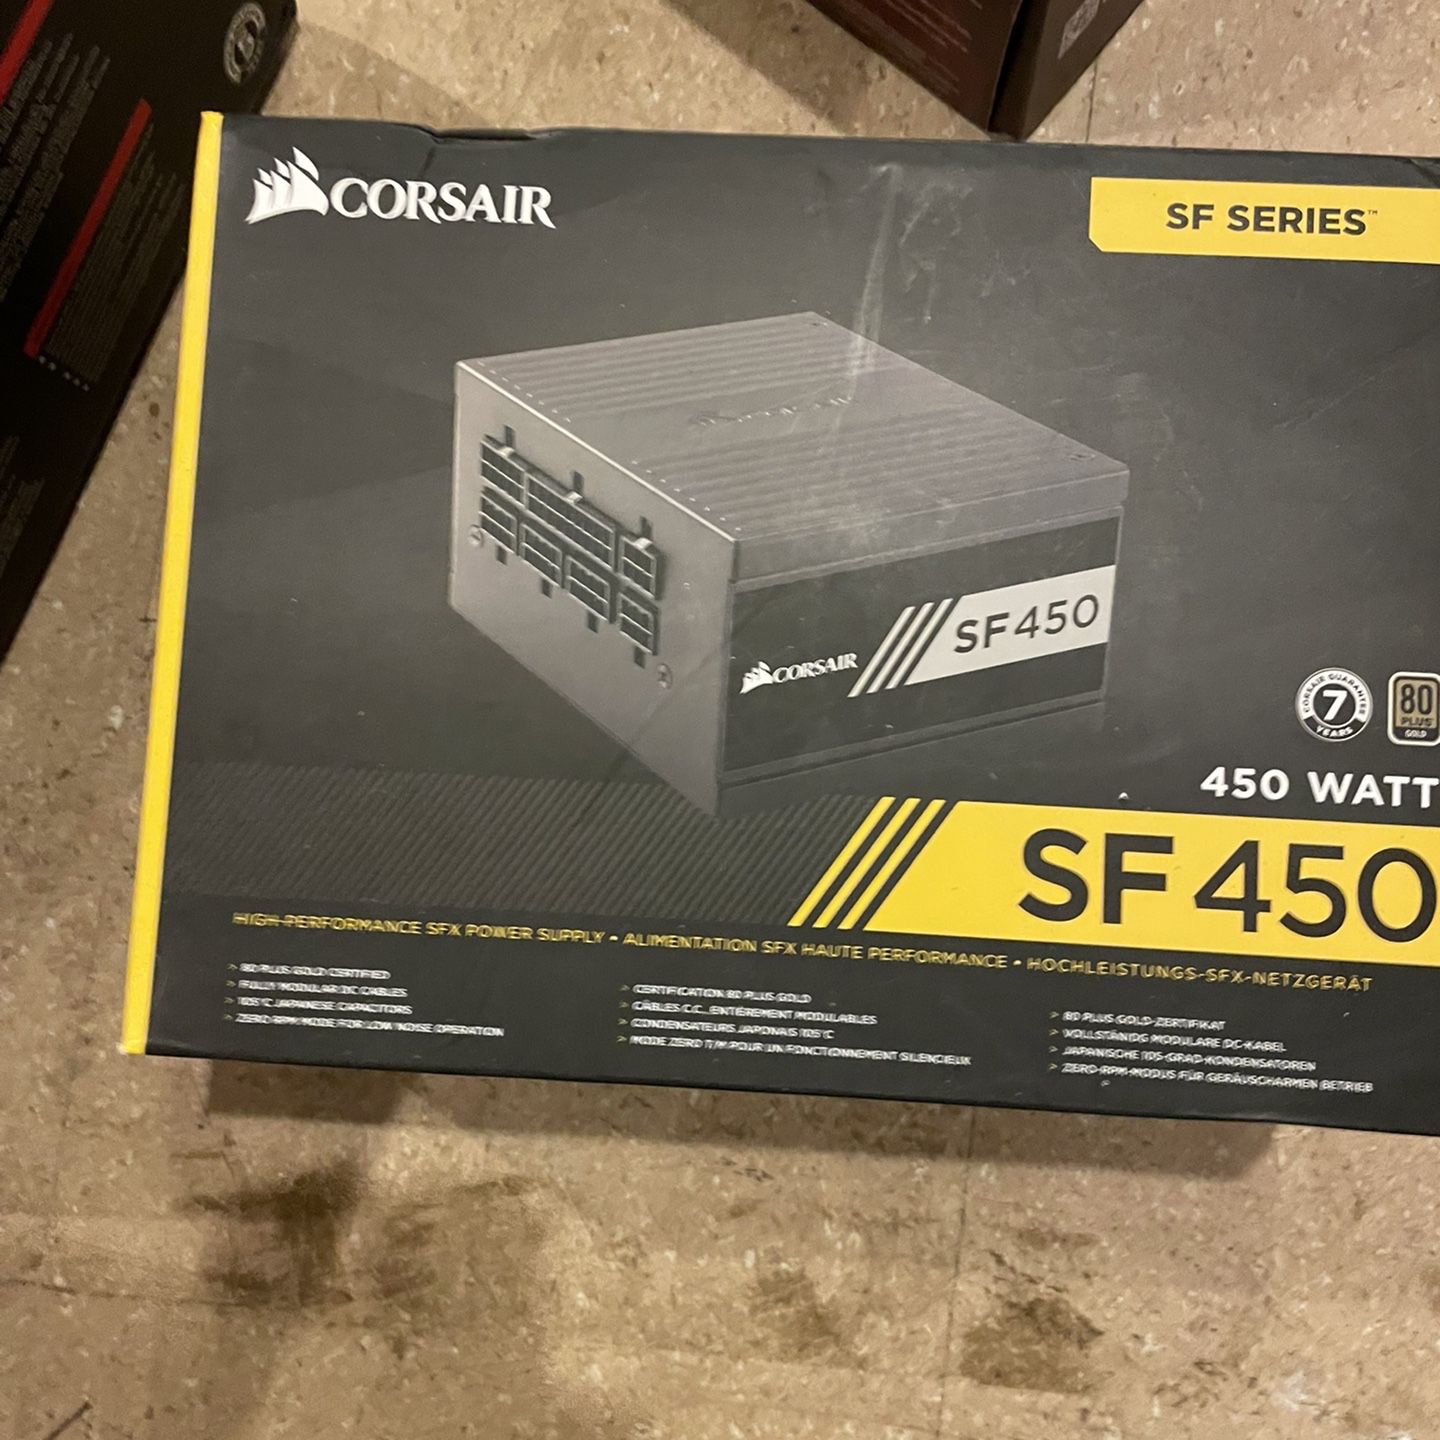 Corsair 450 Sale in Tacoma, OfferUp